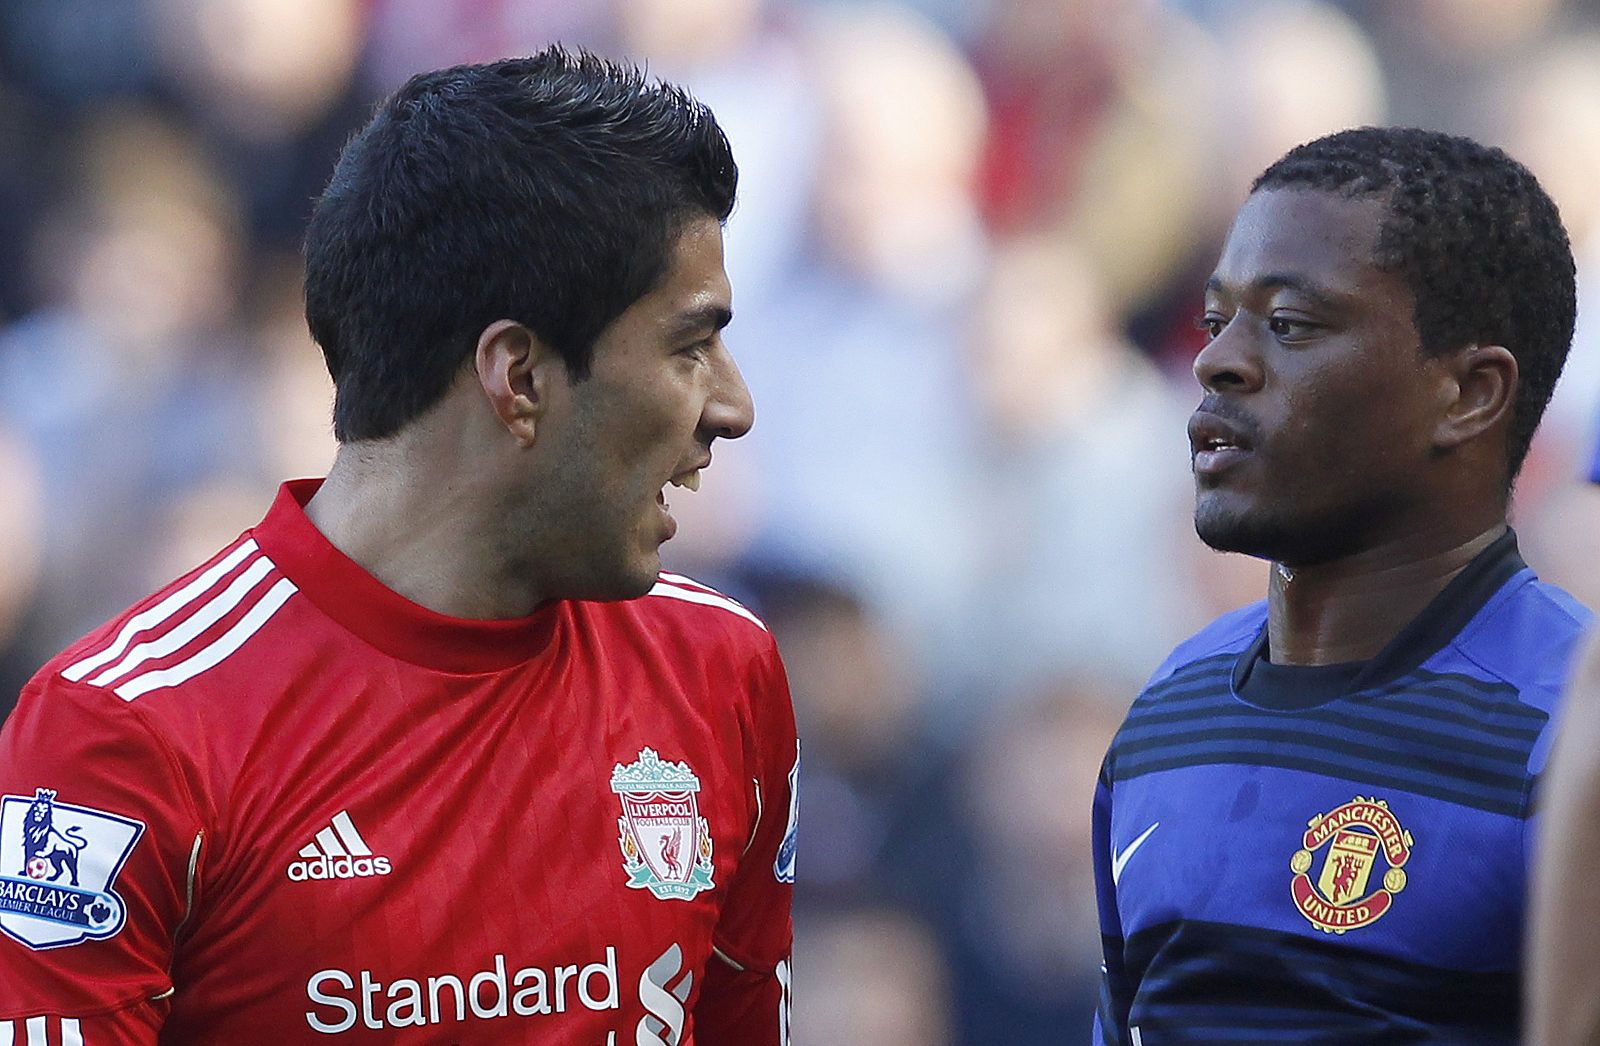 File photo of Liverpool's Suarez and Manchester United's Evra looking at each other during their English Premier League soccer match at Anfield in Liverpool